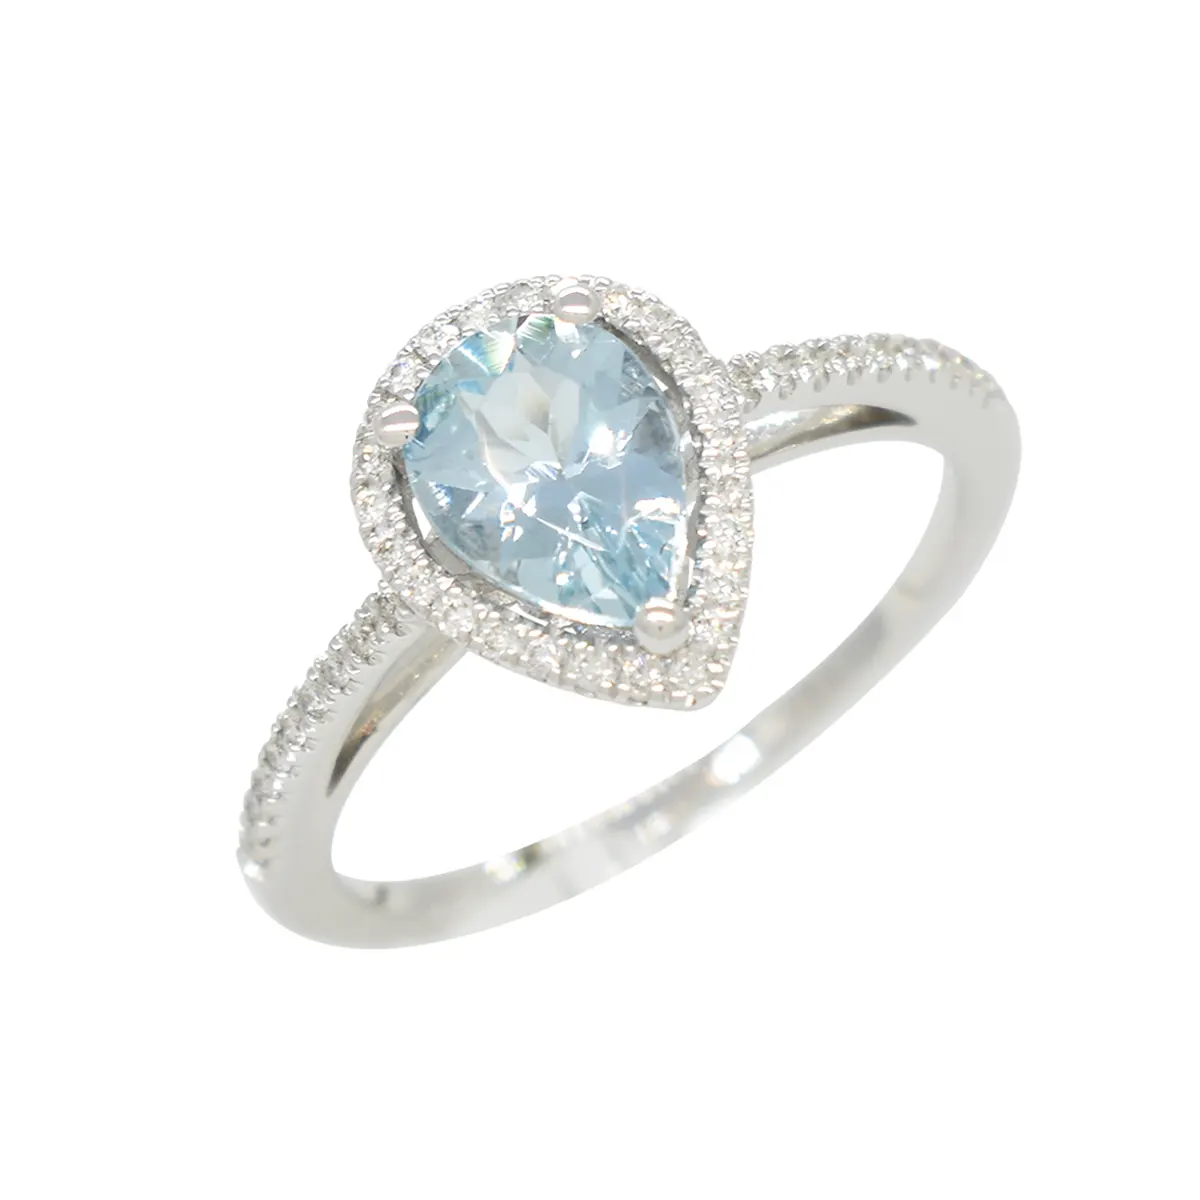 Pear Shape Aquamarine Ring with Round Diamonds in White Gold